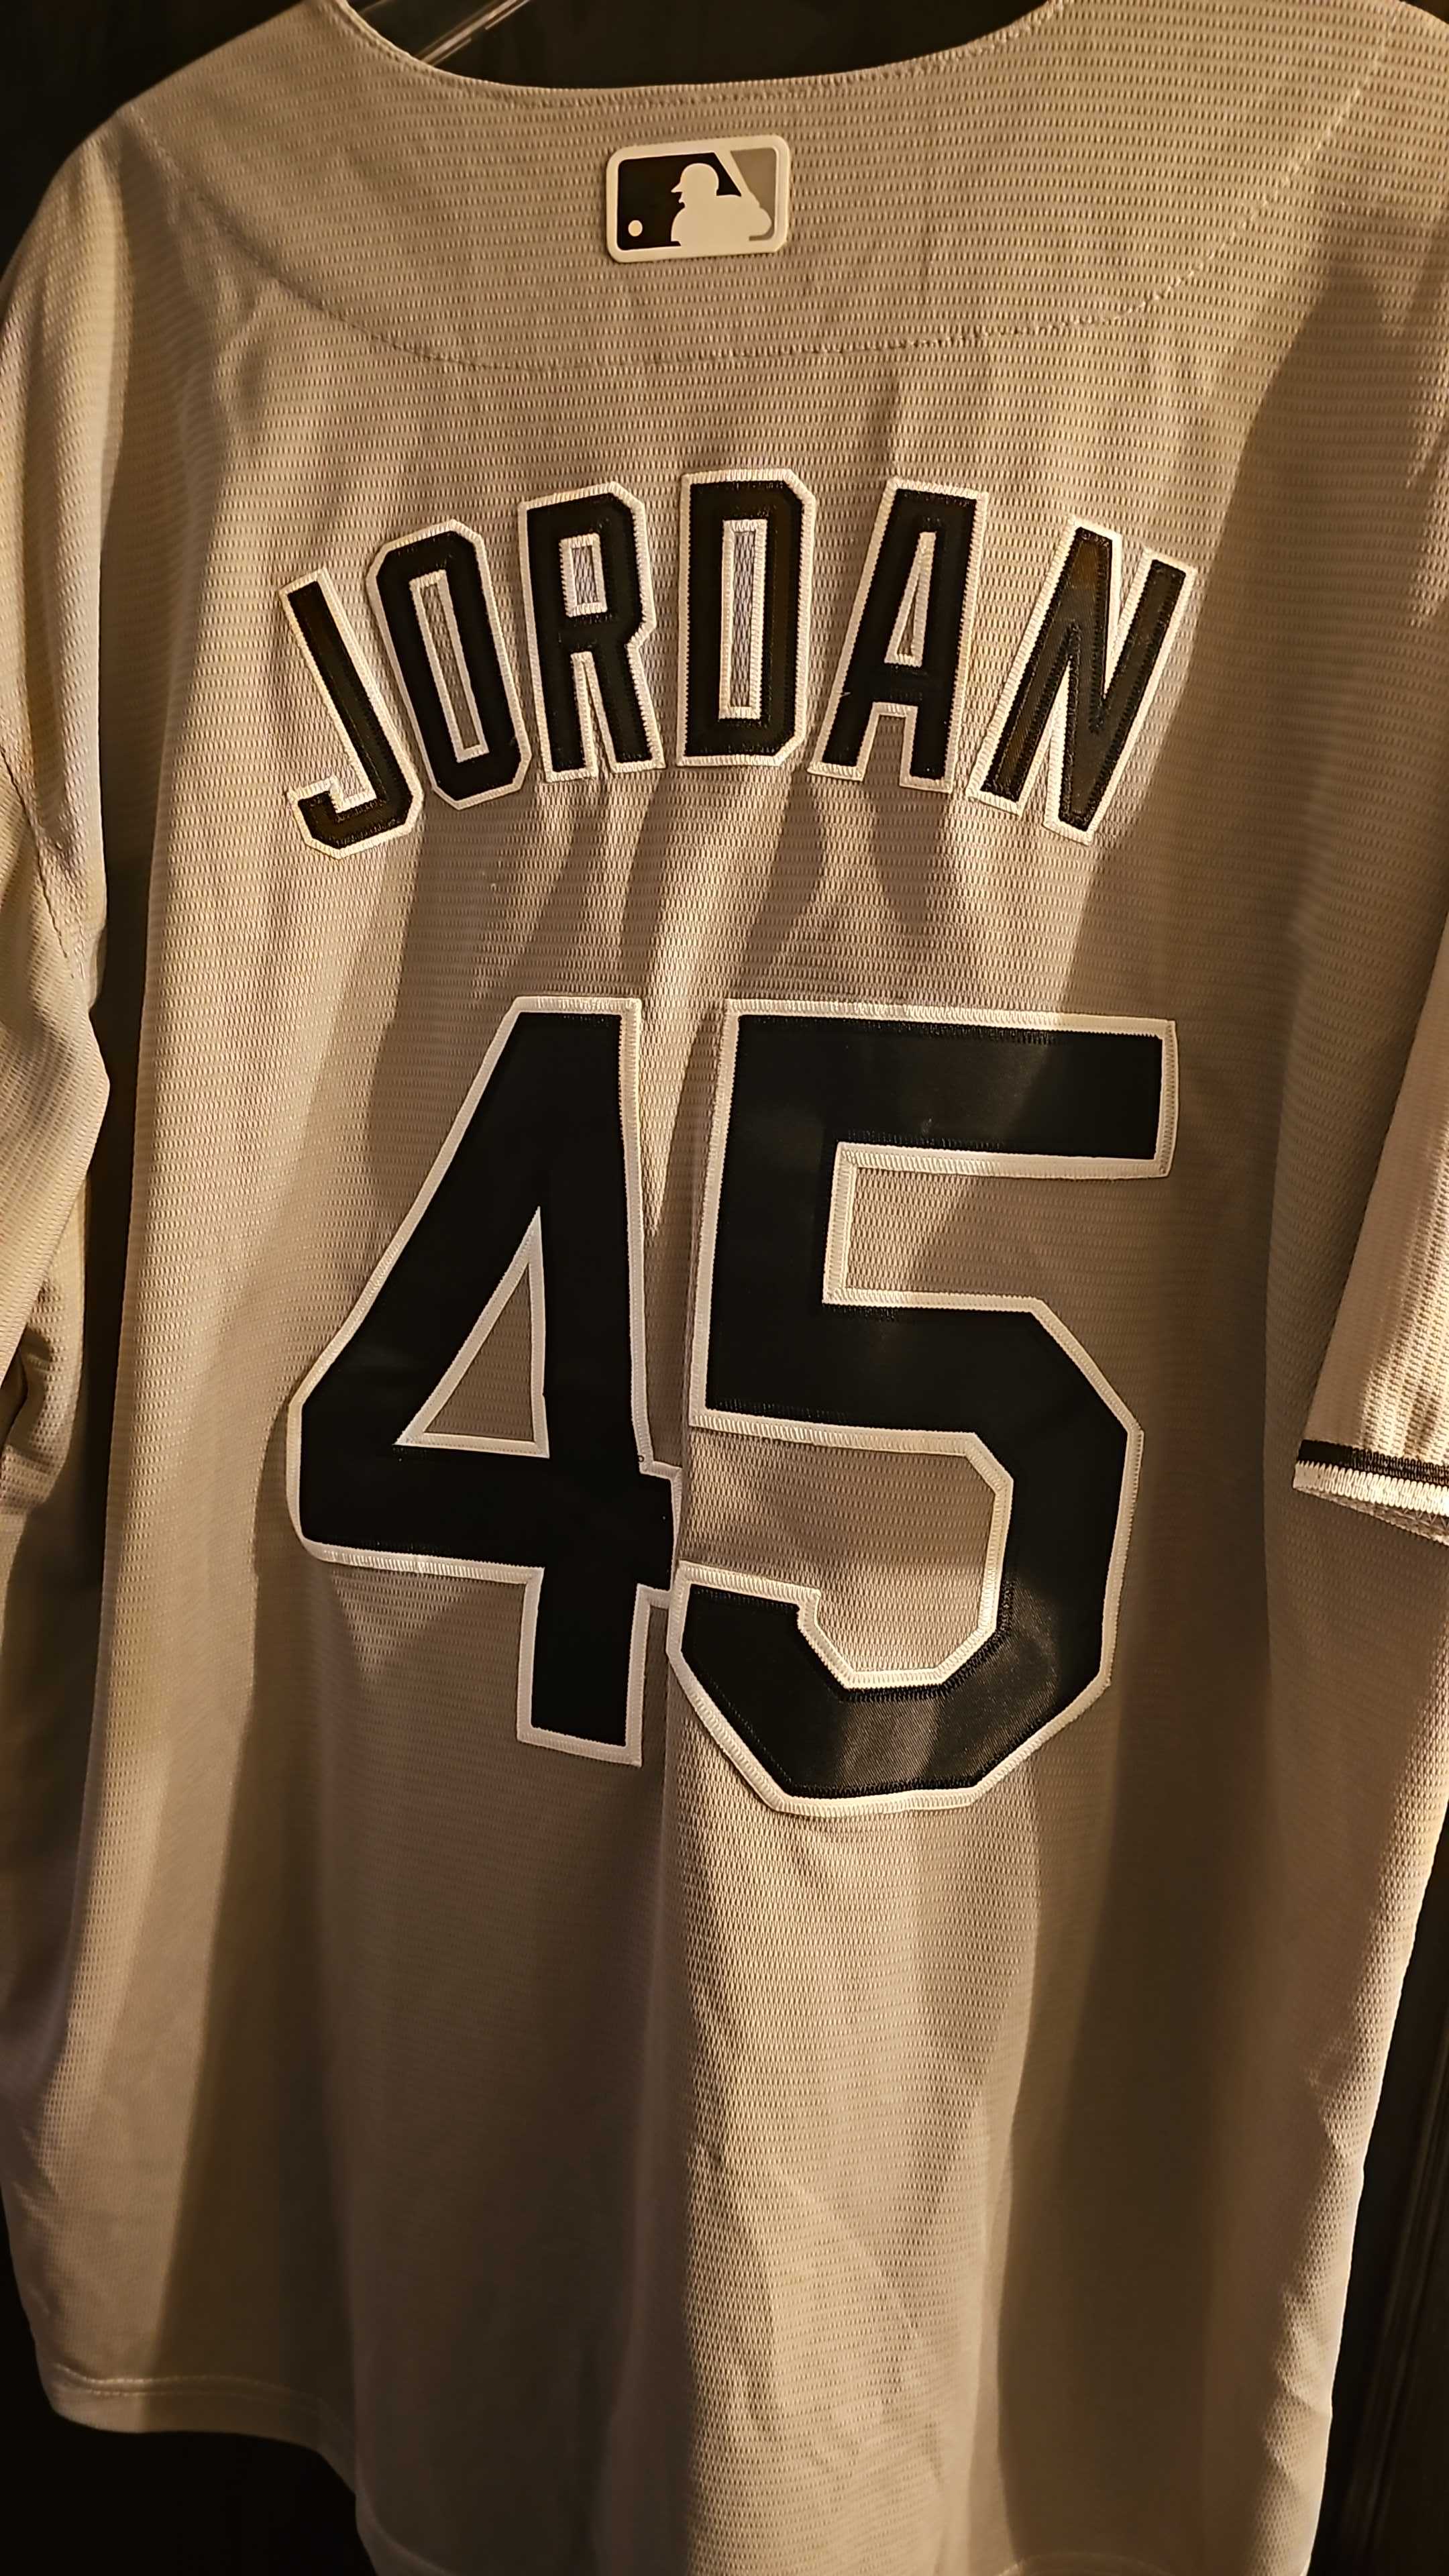 You'll never guess who tops MLB jersey sales  - Beckett News